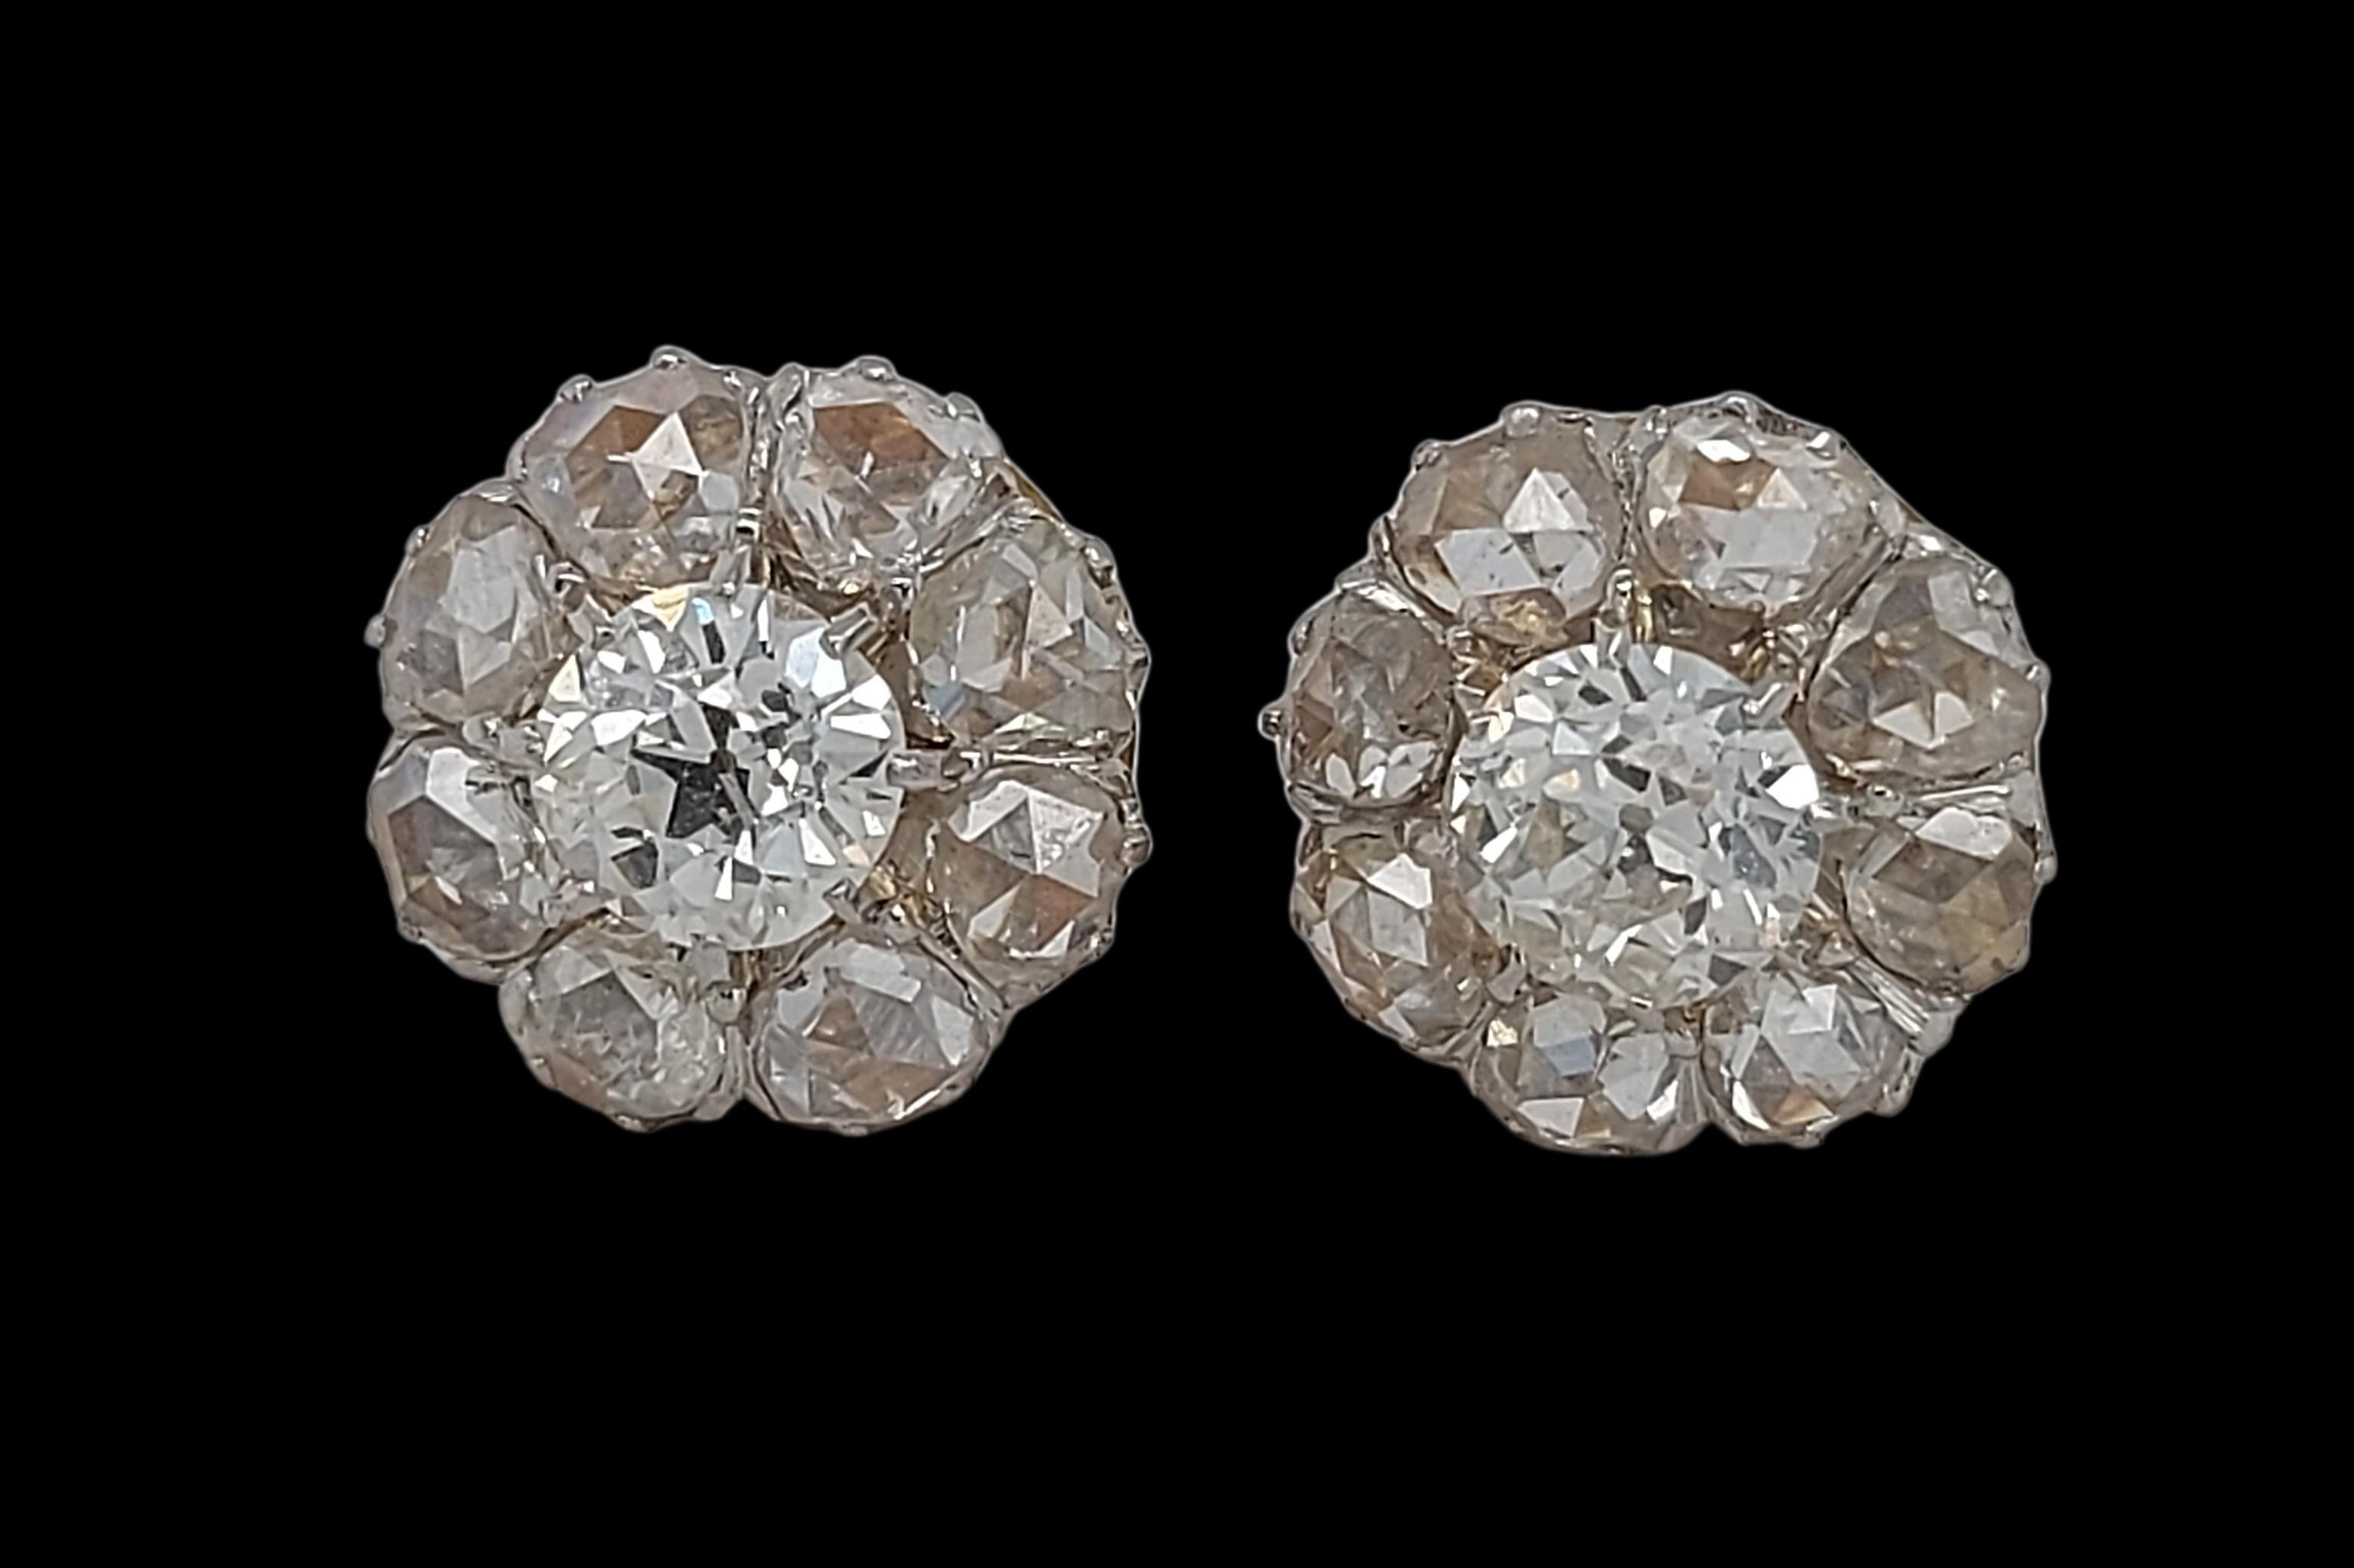 Stunning Diamond Stud Earrings in 18kt Yellow & White Gold

Diamond: Centre Diamond: round old mine cut  approx. 0.60ct each, surrounded by 8 rose cut diamonds , Diamonds are very white and clean

Material: 18kt yellow and white gold,